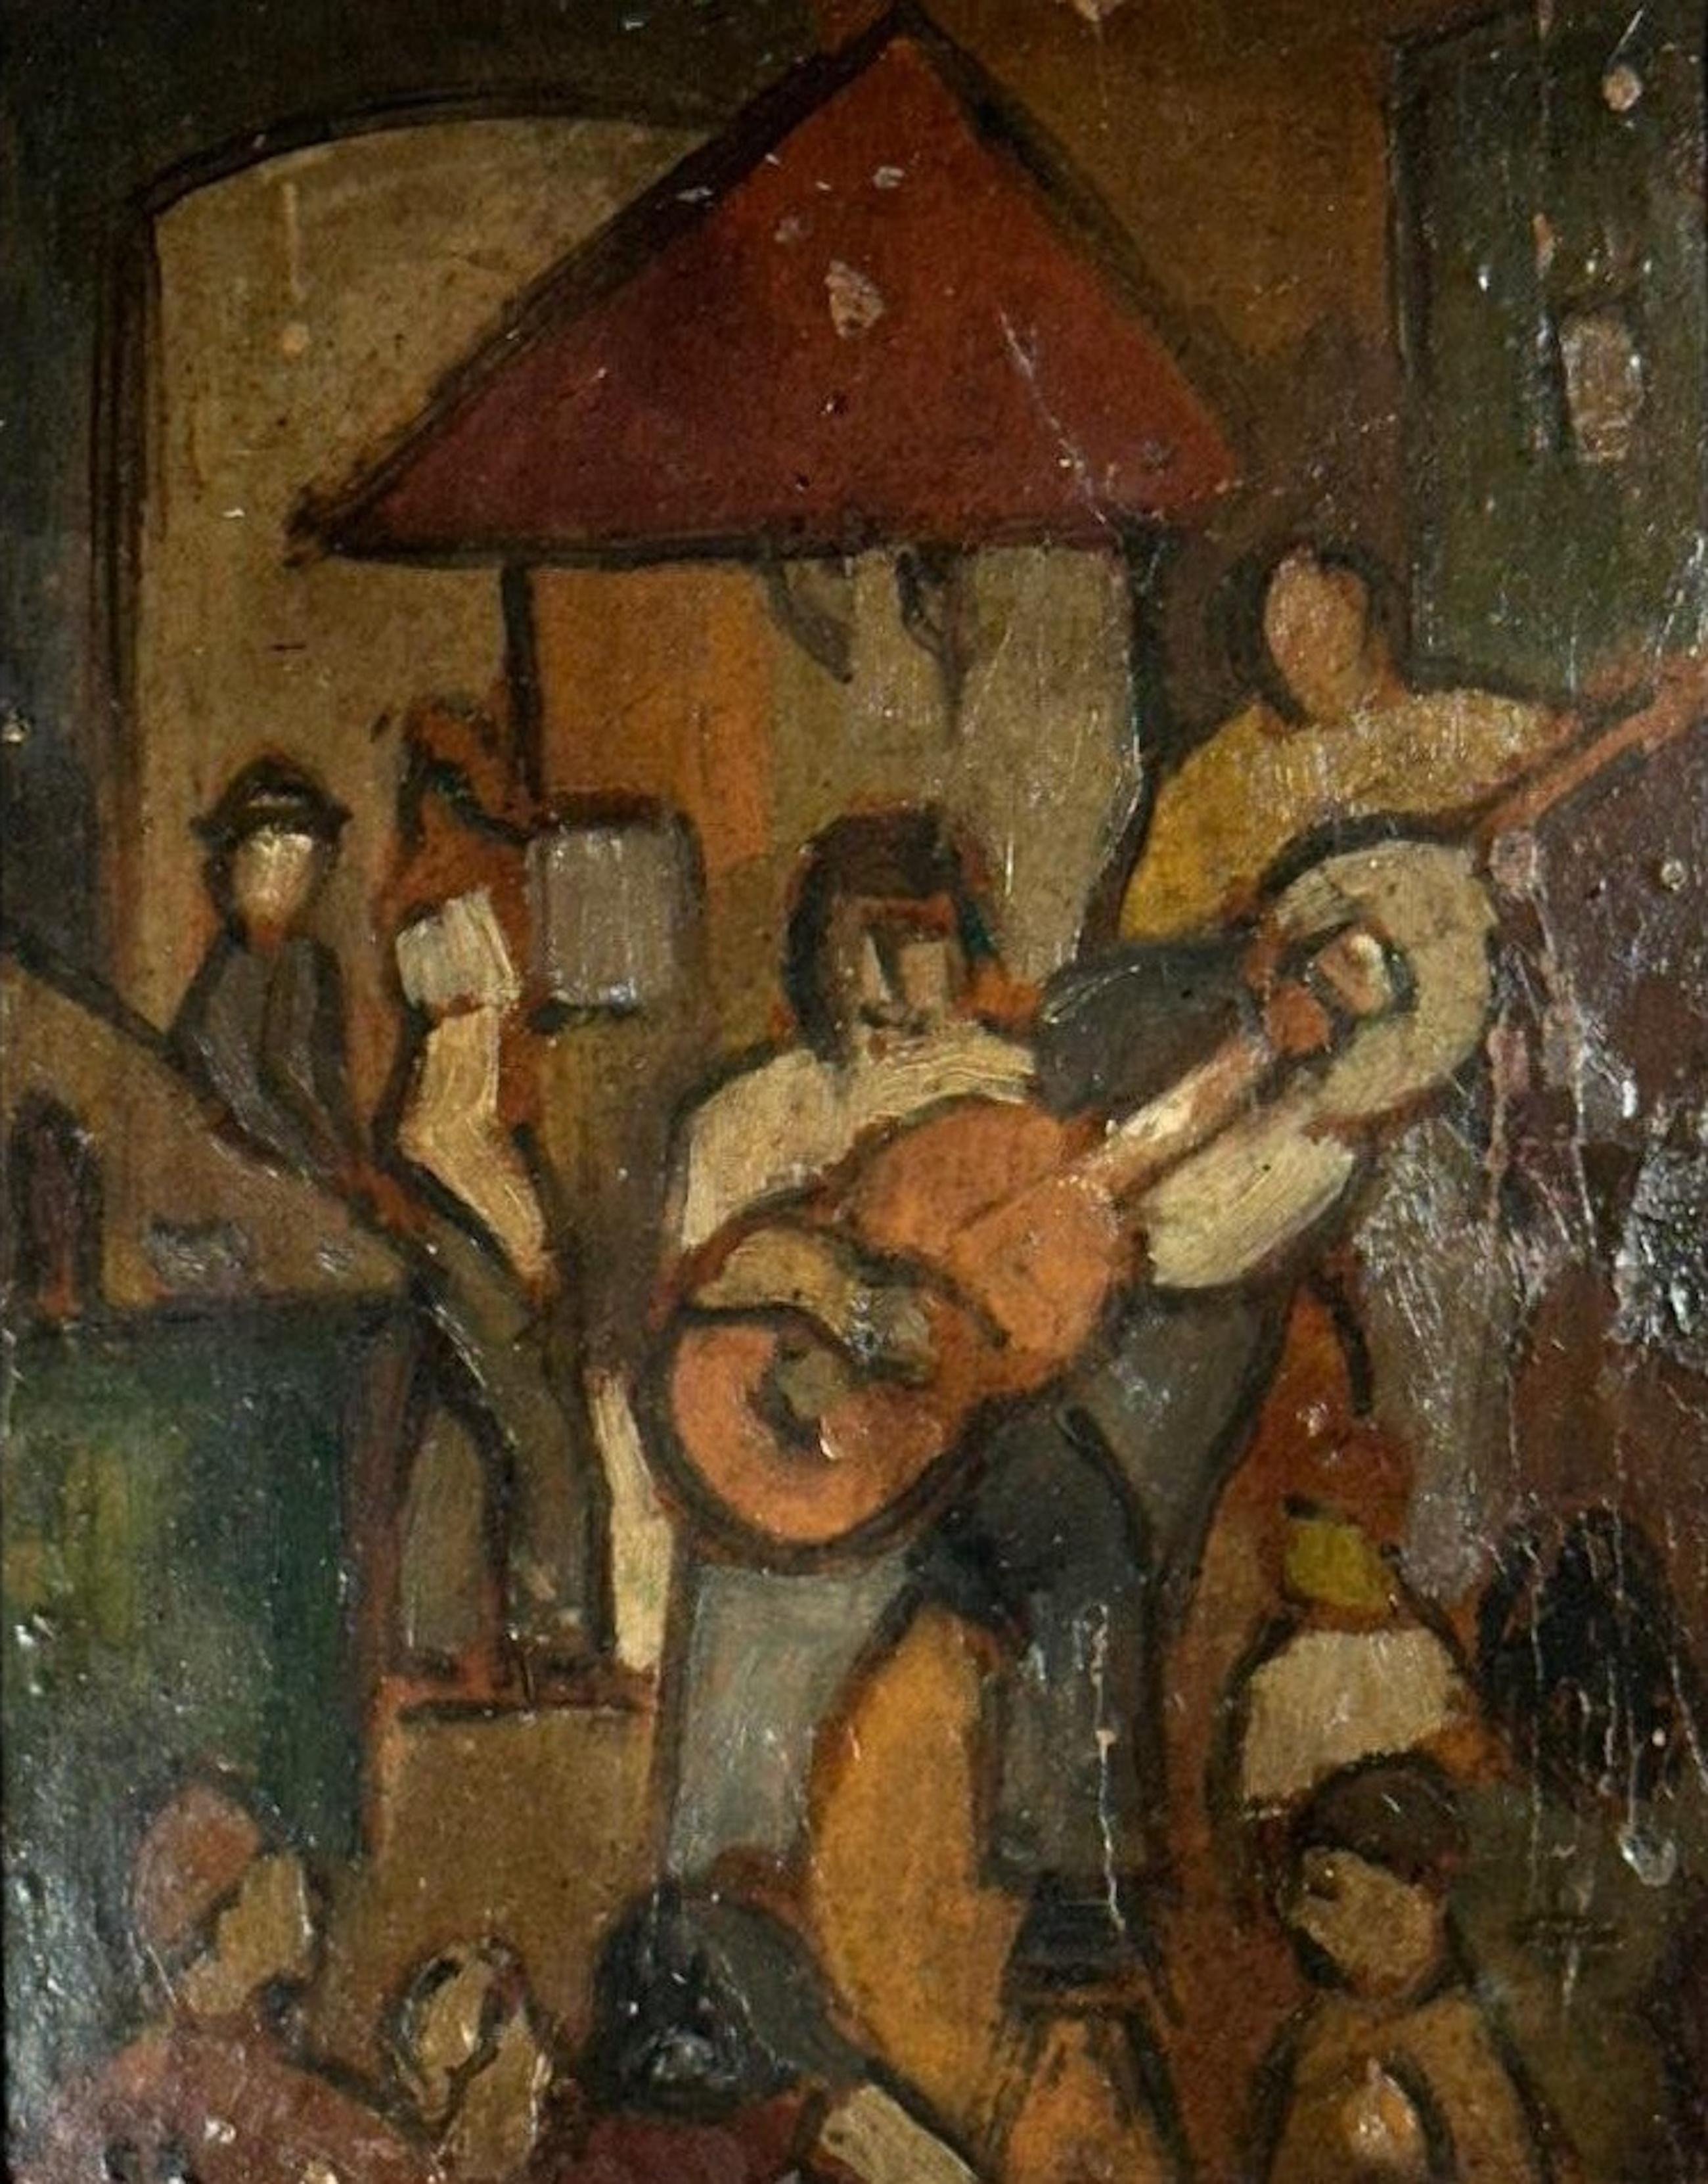 George Rouault Studio Fauvism Oil Painting on Paper on Board.

Characteristic genre painting of a musician group in typical style and technique of George Rouault (1871-1958). The Fauvist style artist had experience in leaded glass paintings which is